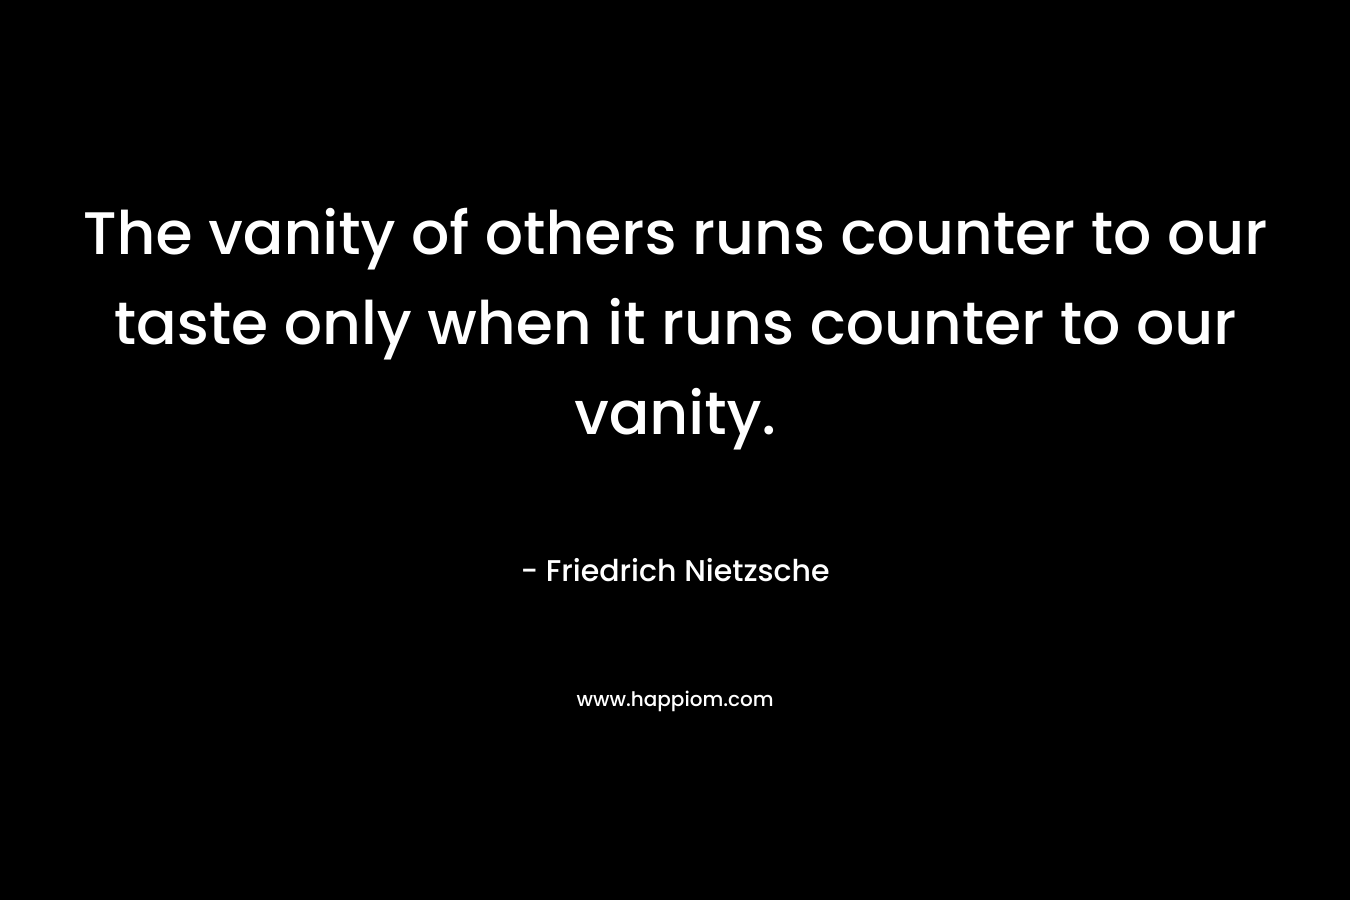 The vanity of others runs counter to our taste only when it runs counter to our vanity. – Friedrich Nietzsche